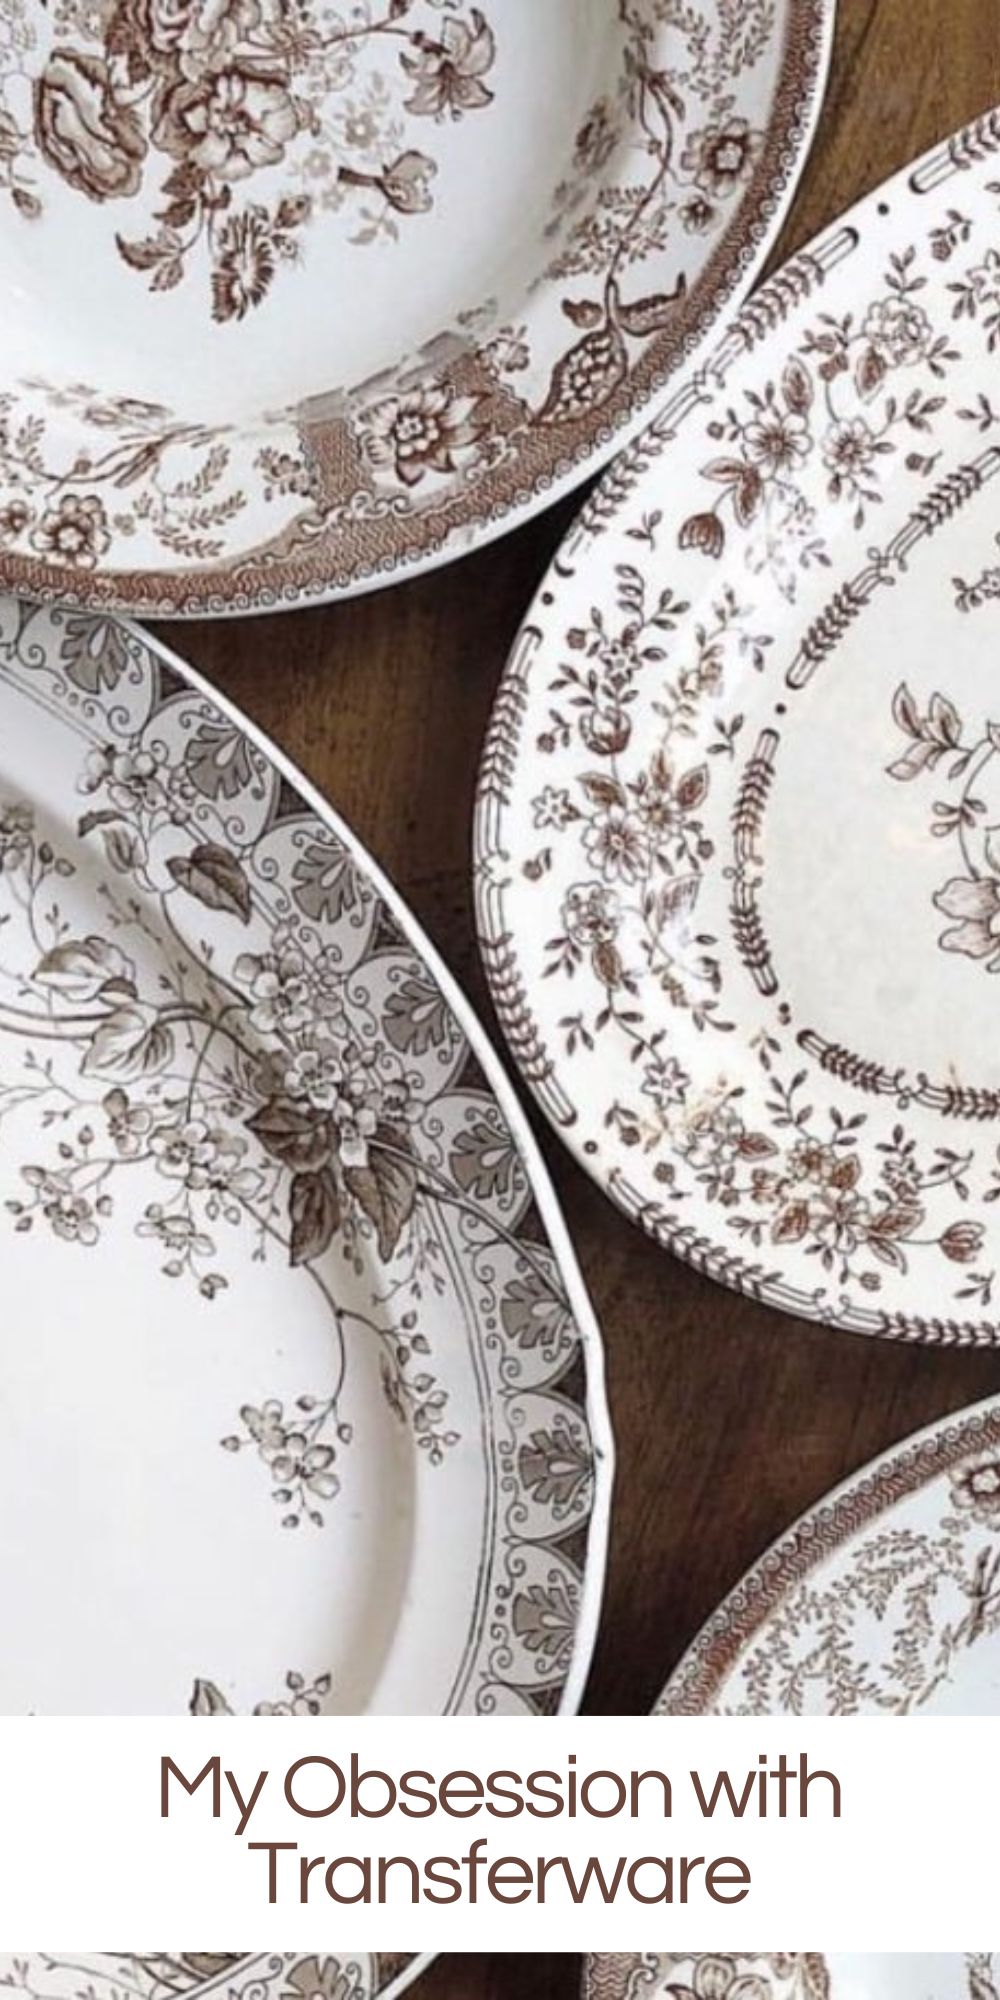 I love collecting vintage items, especially transferware, which is my favorite. It's a beloved staple of vintage home decor, cherished for its intricate designs.